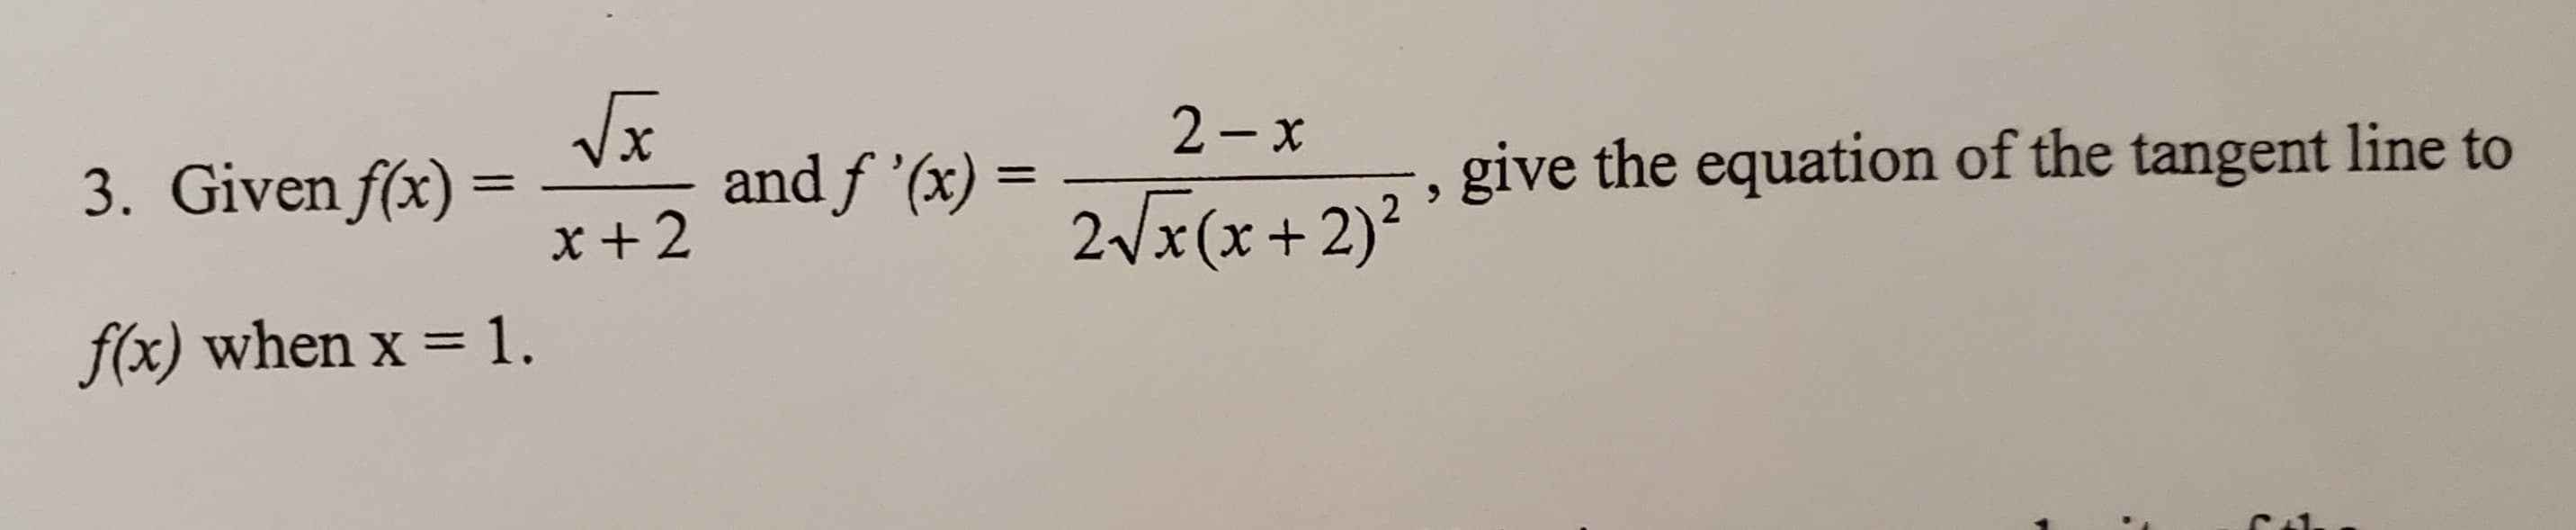 3. Given f(x) =
x + 2
and ƒ '(x) =
give the equation of the tangent line to
%3|
2Vx(x+2)²
f(x) when x = 1.
